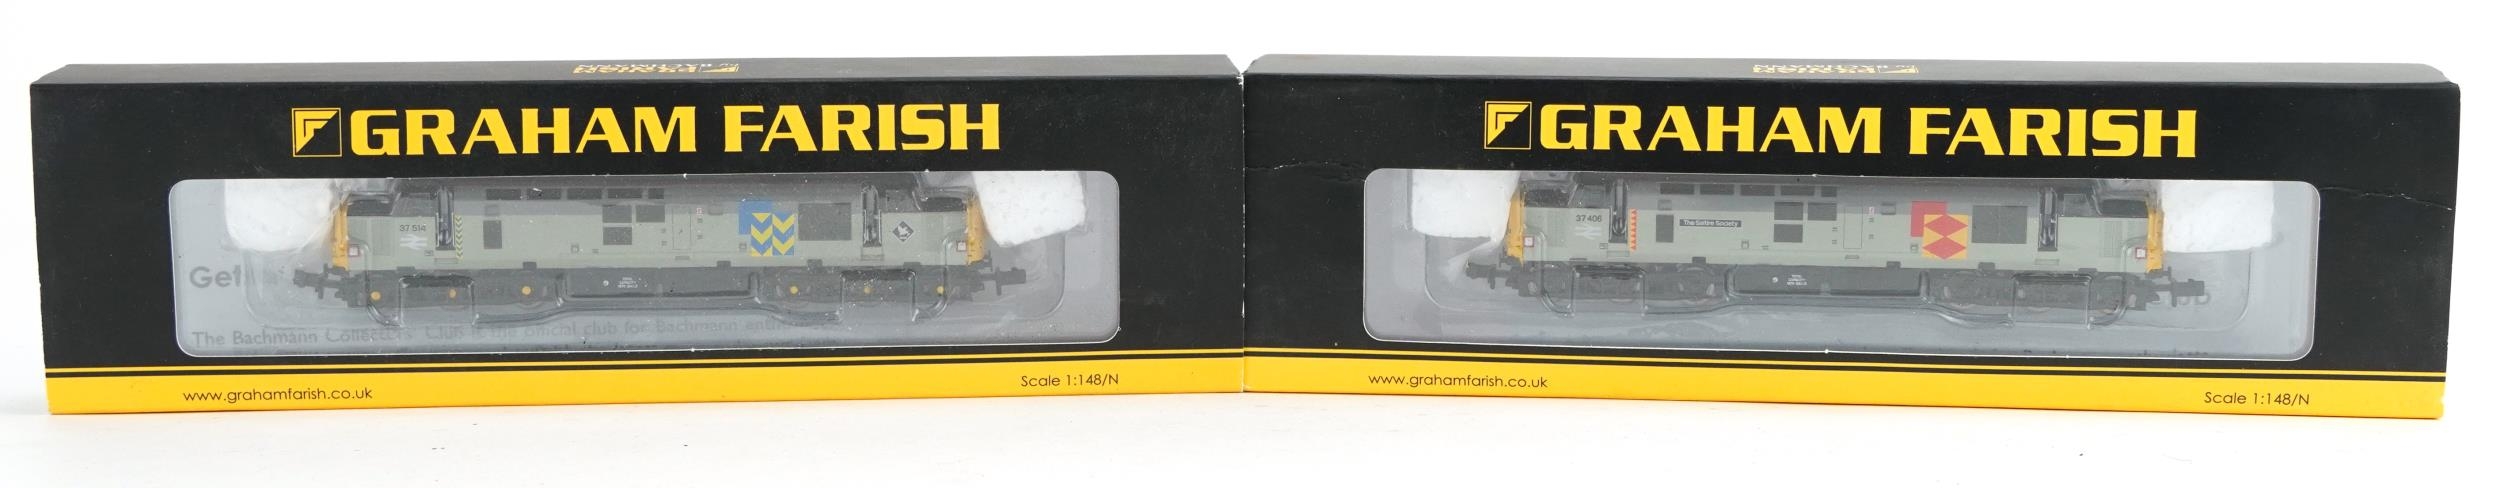 Two Graham Farish N gauge model railway locomotives with cases, numbers 371-166 and 371-167